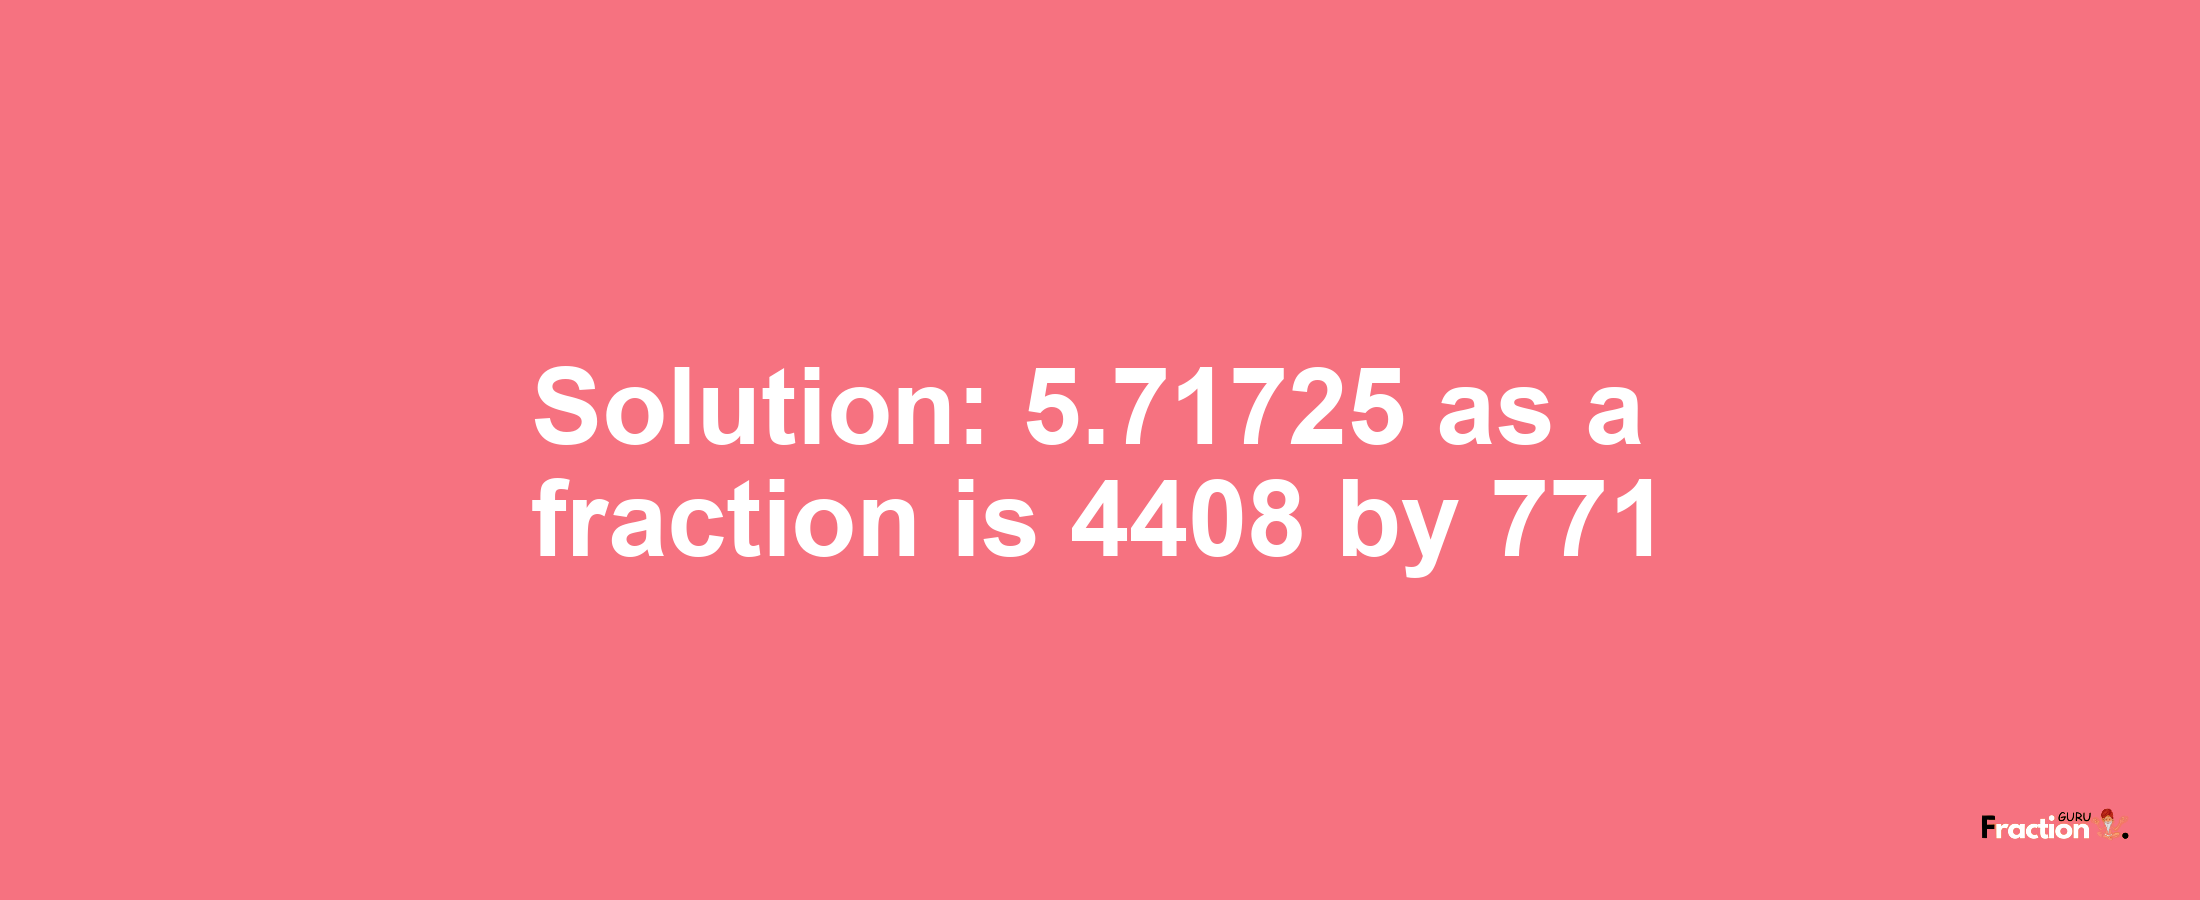 Solution:5.71725 as a fraction is 4408/771